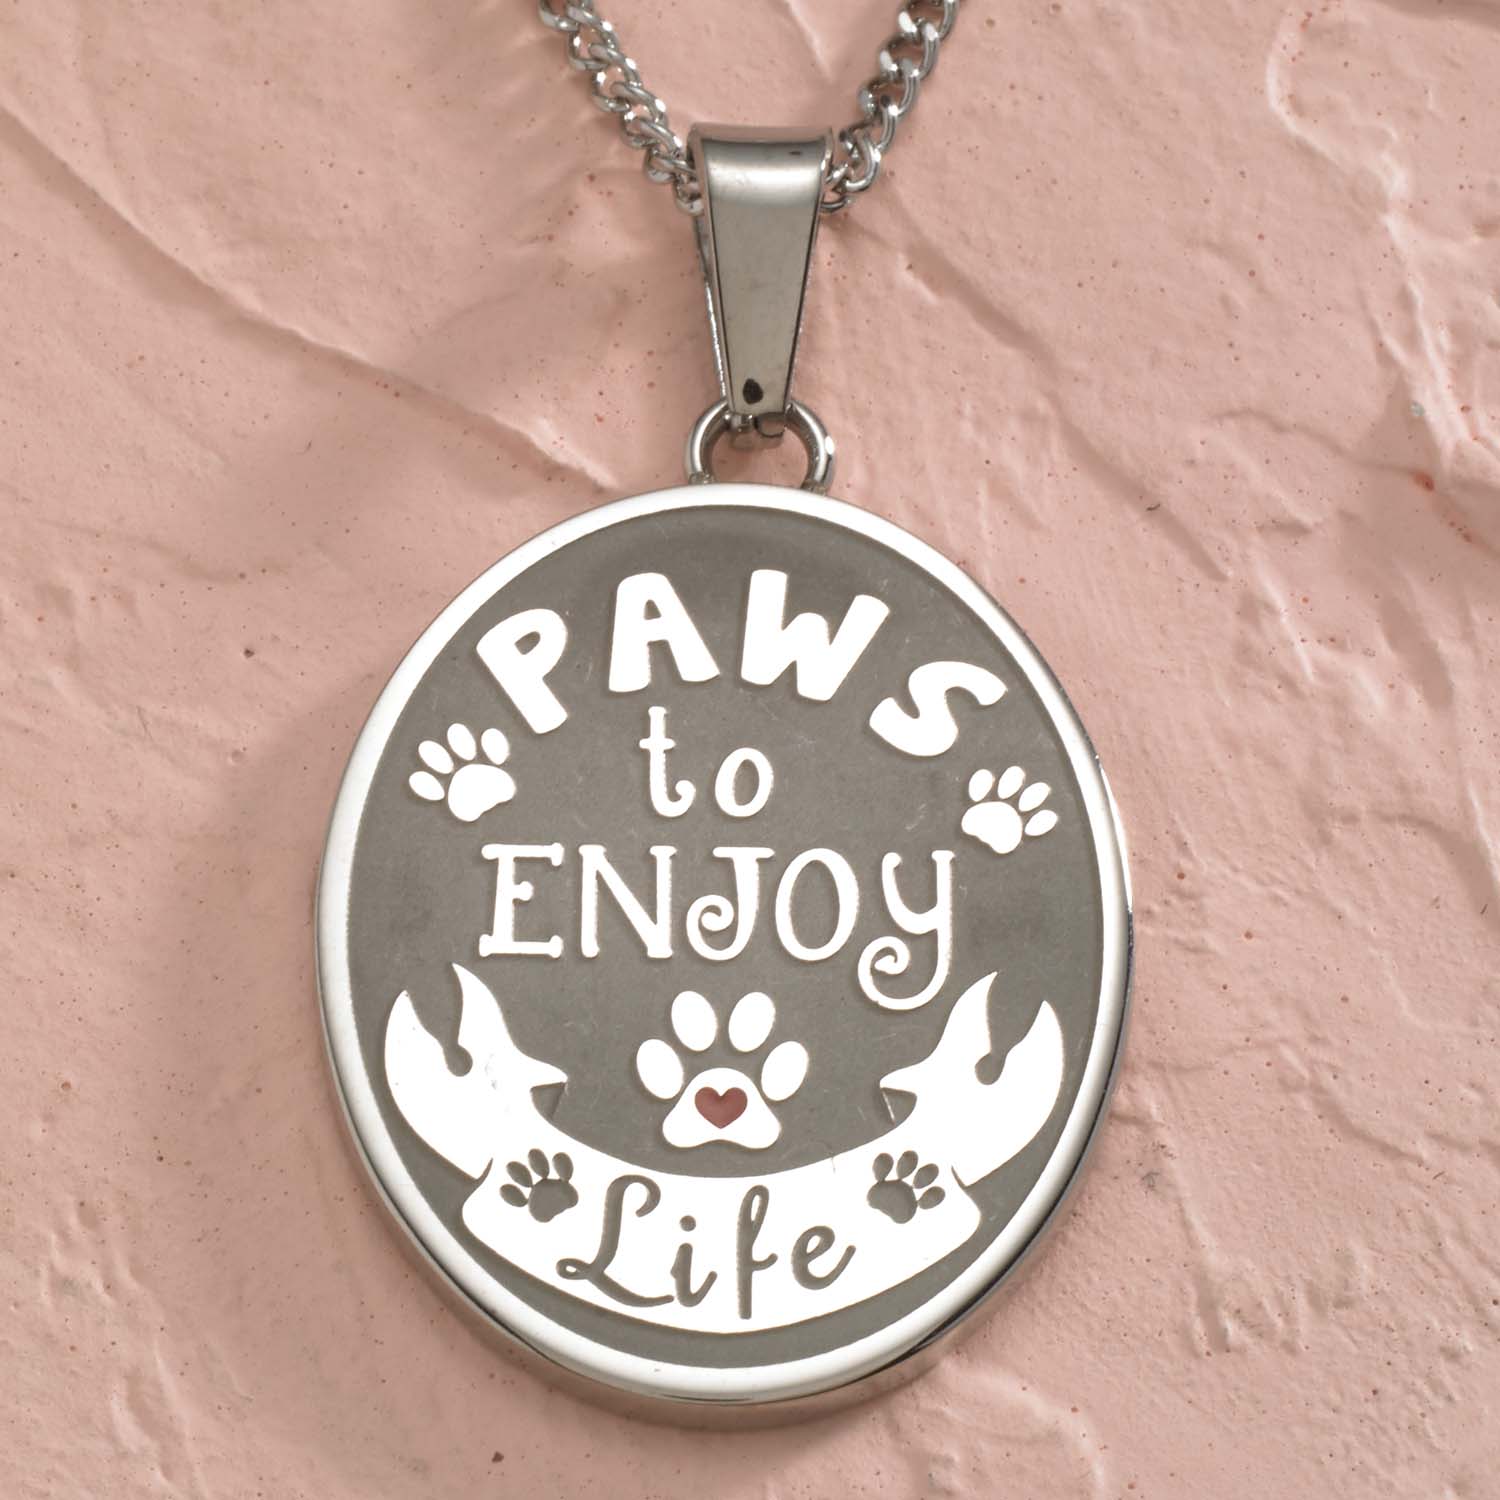 Paws To Enjoy Life Stainless Steel Pendant Necklace for Pet Lovers